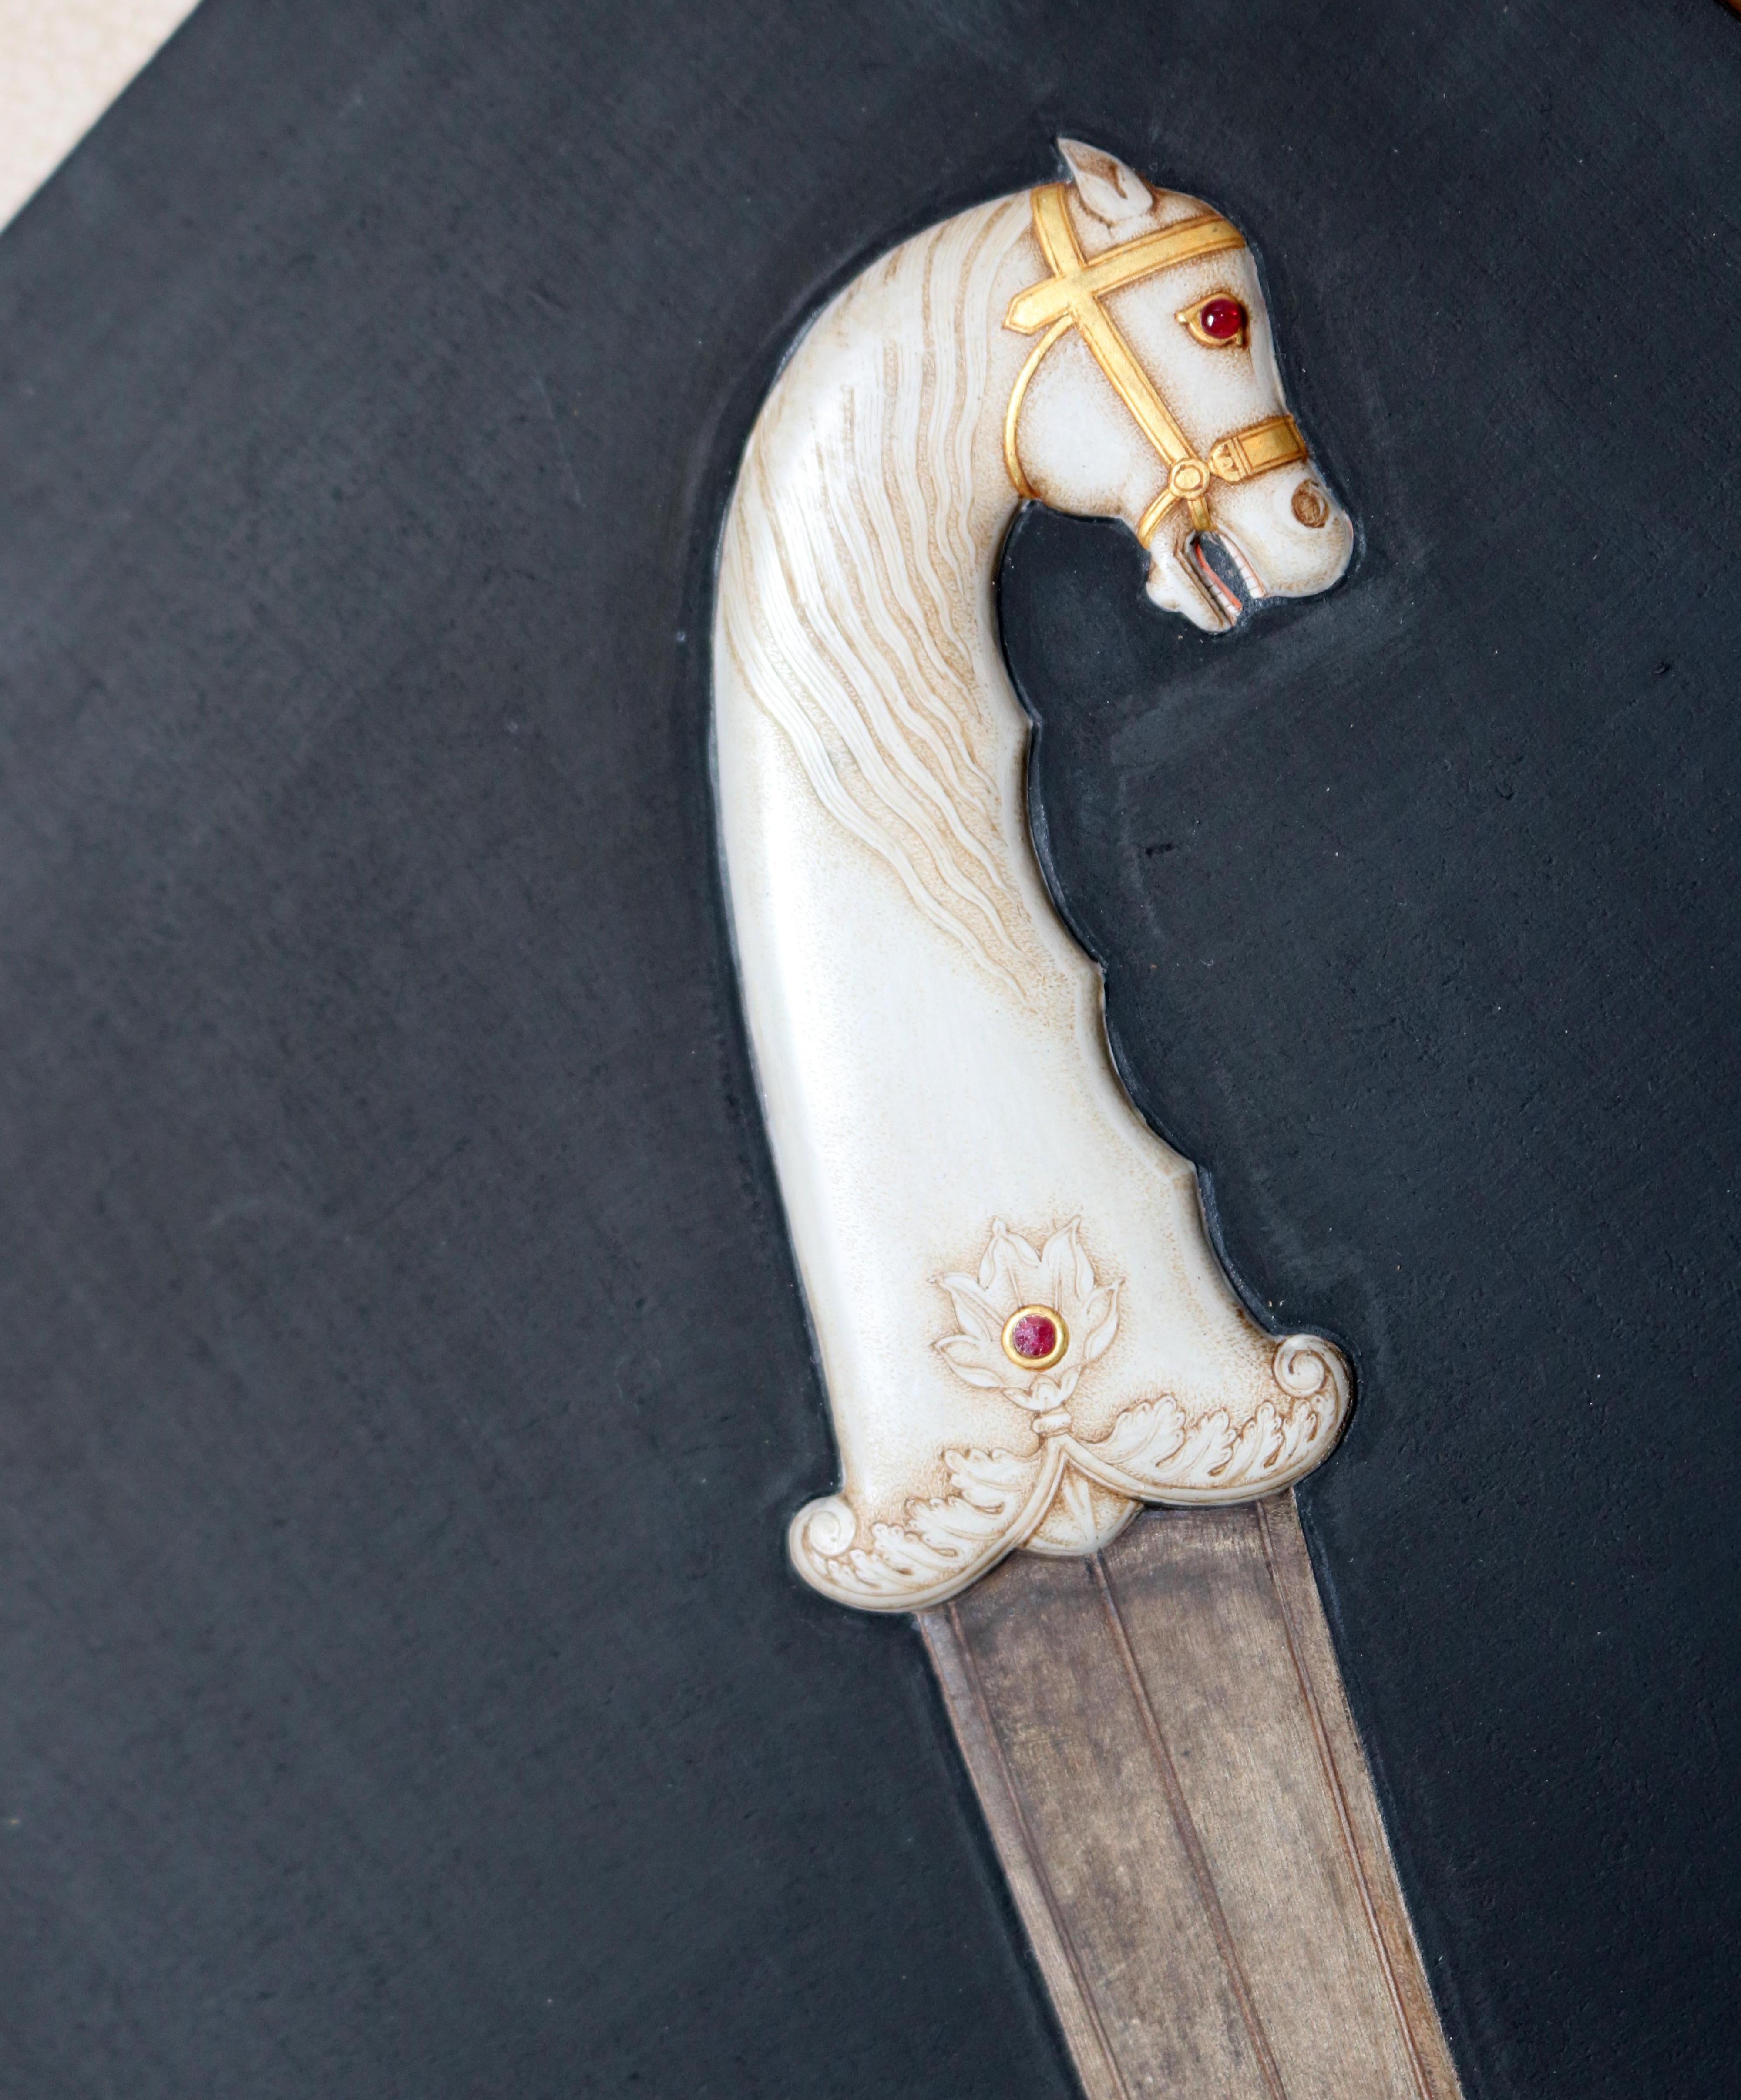 1985 hyperrealist relief painting of a hand drawn horse shaped dagger using vivid colors, including gold gilding. Signed Ramesh Sharma.